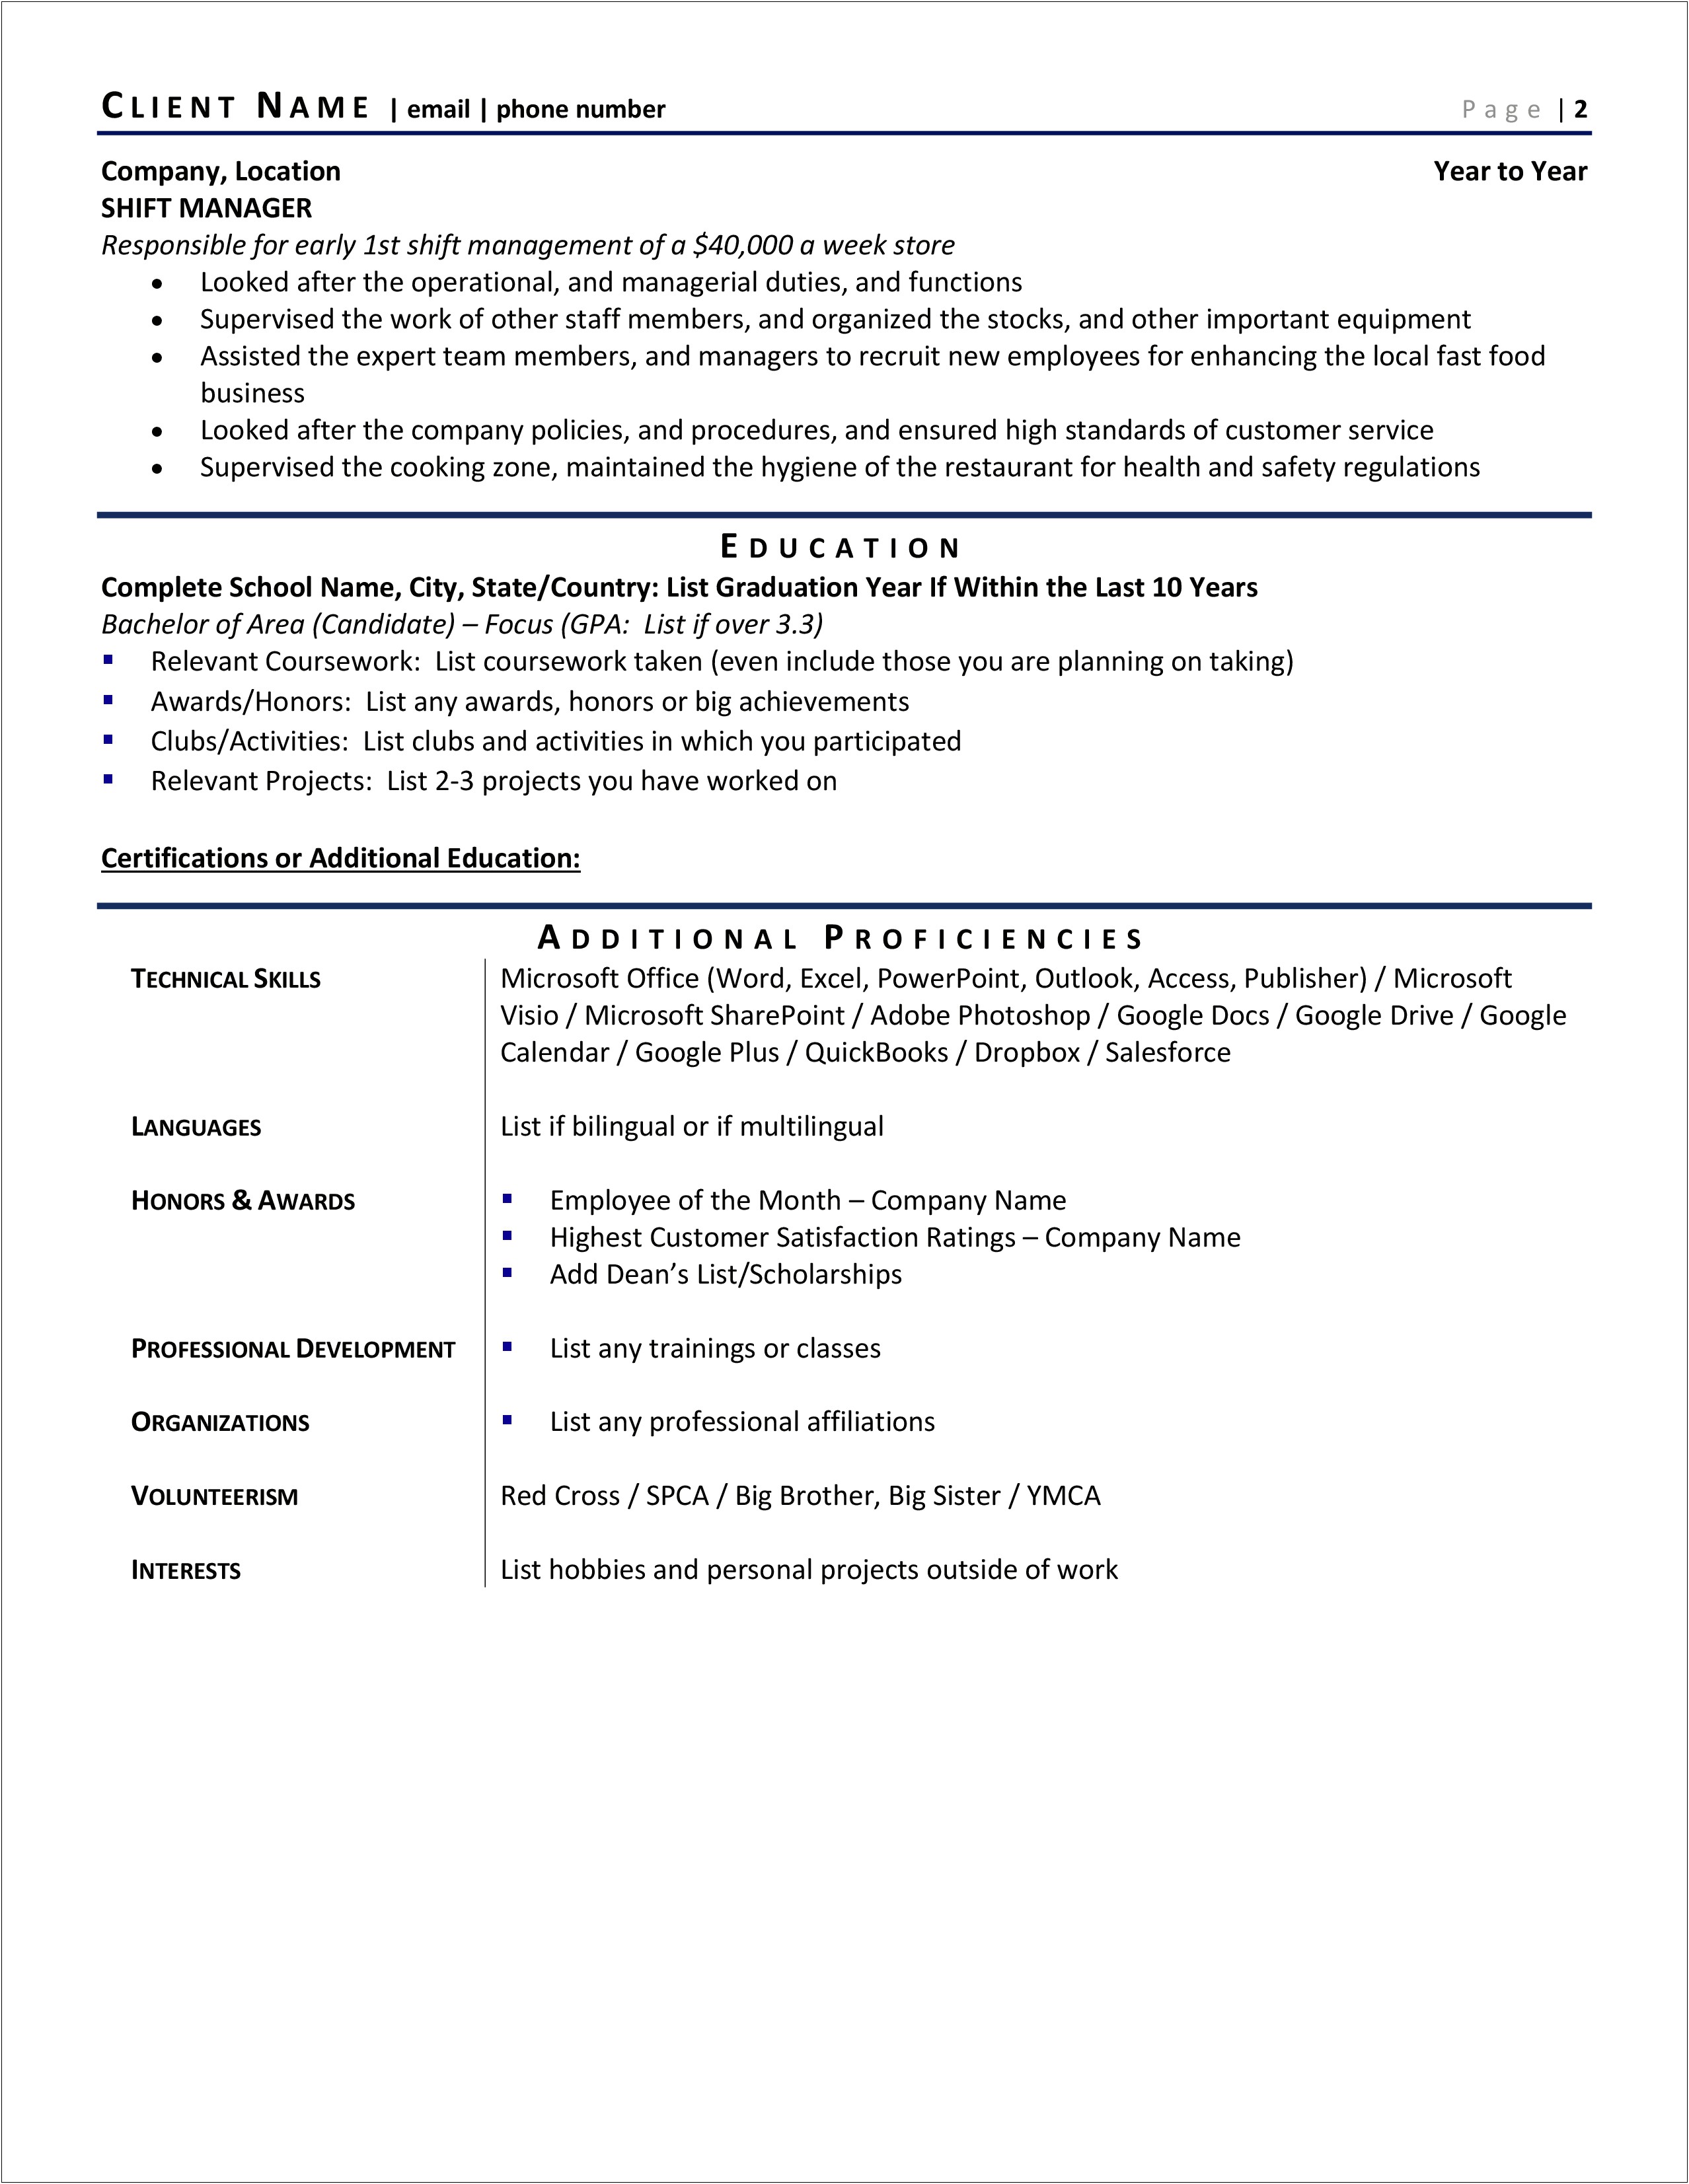 Good Interests To List On A Resume